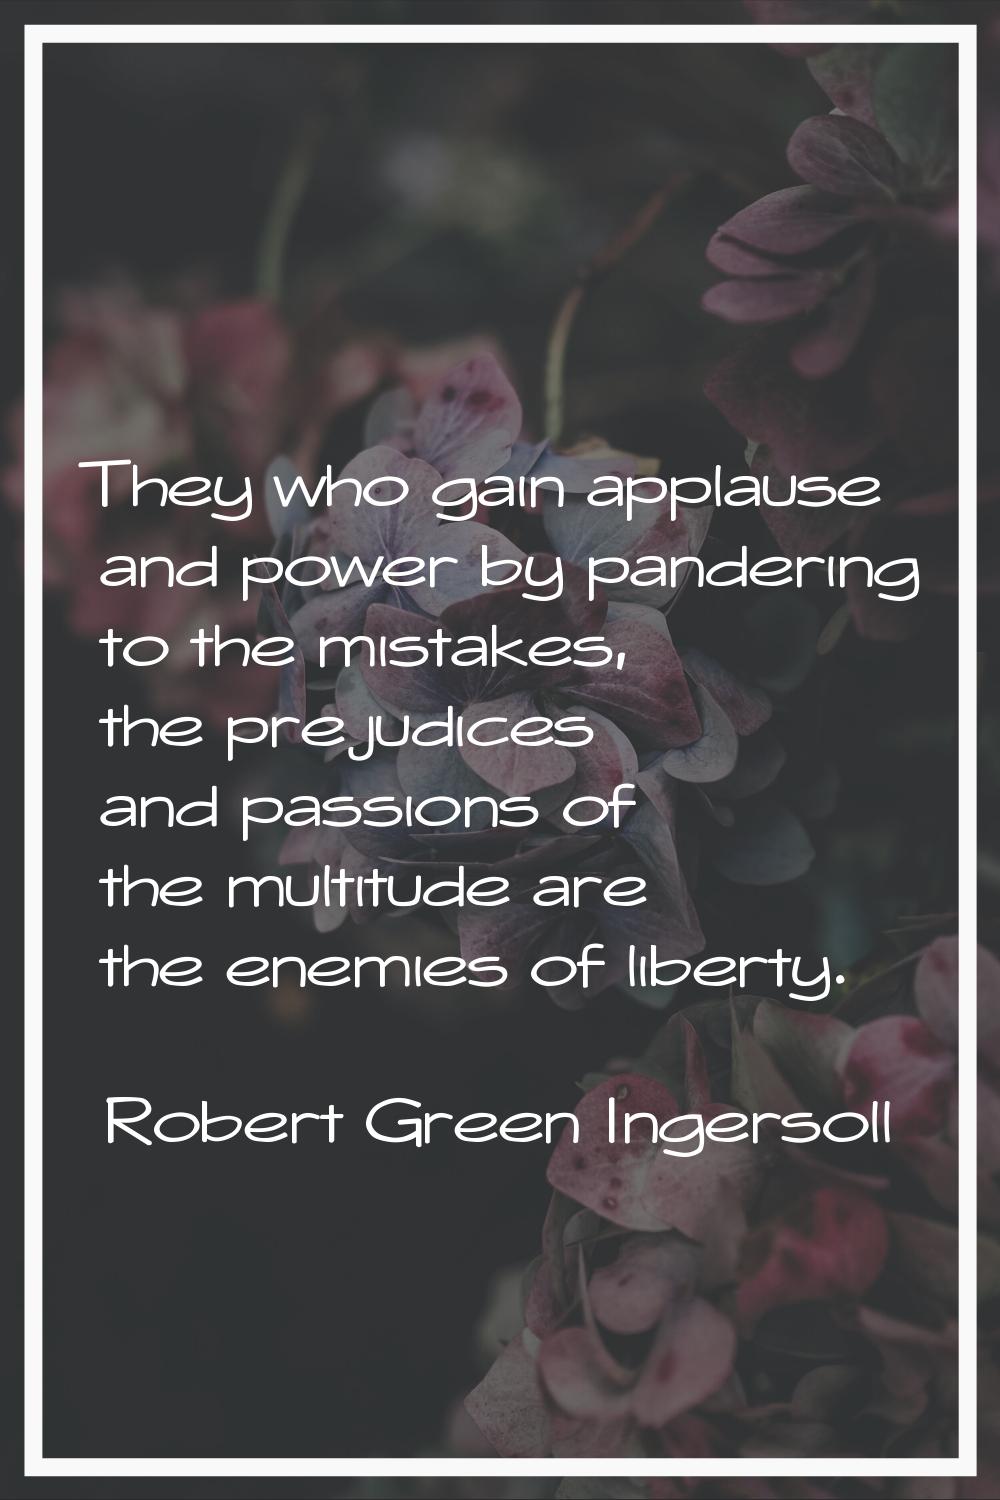 They who gain applause and power by pandering to the mistakes, the prejudices and passions of the m